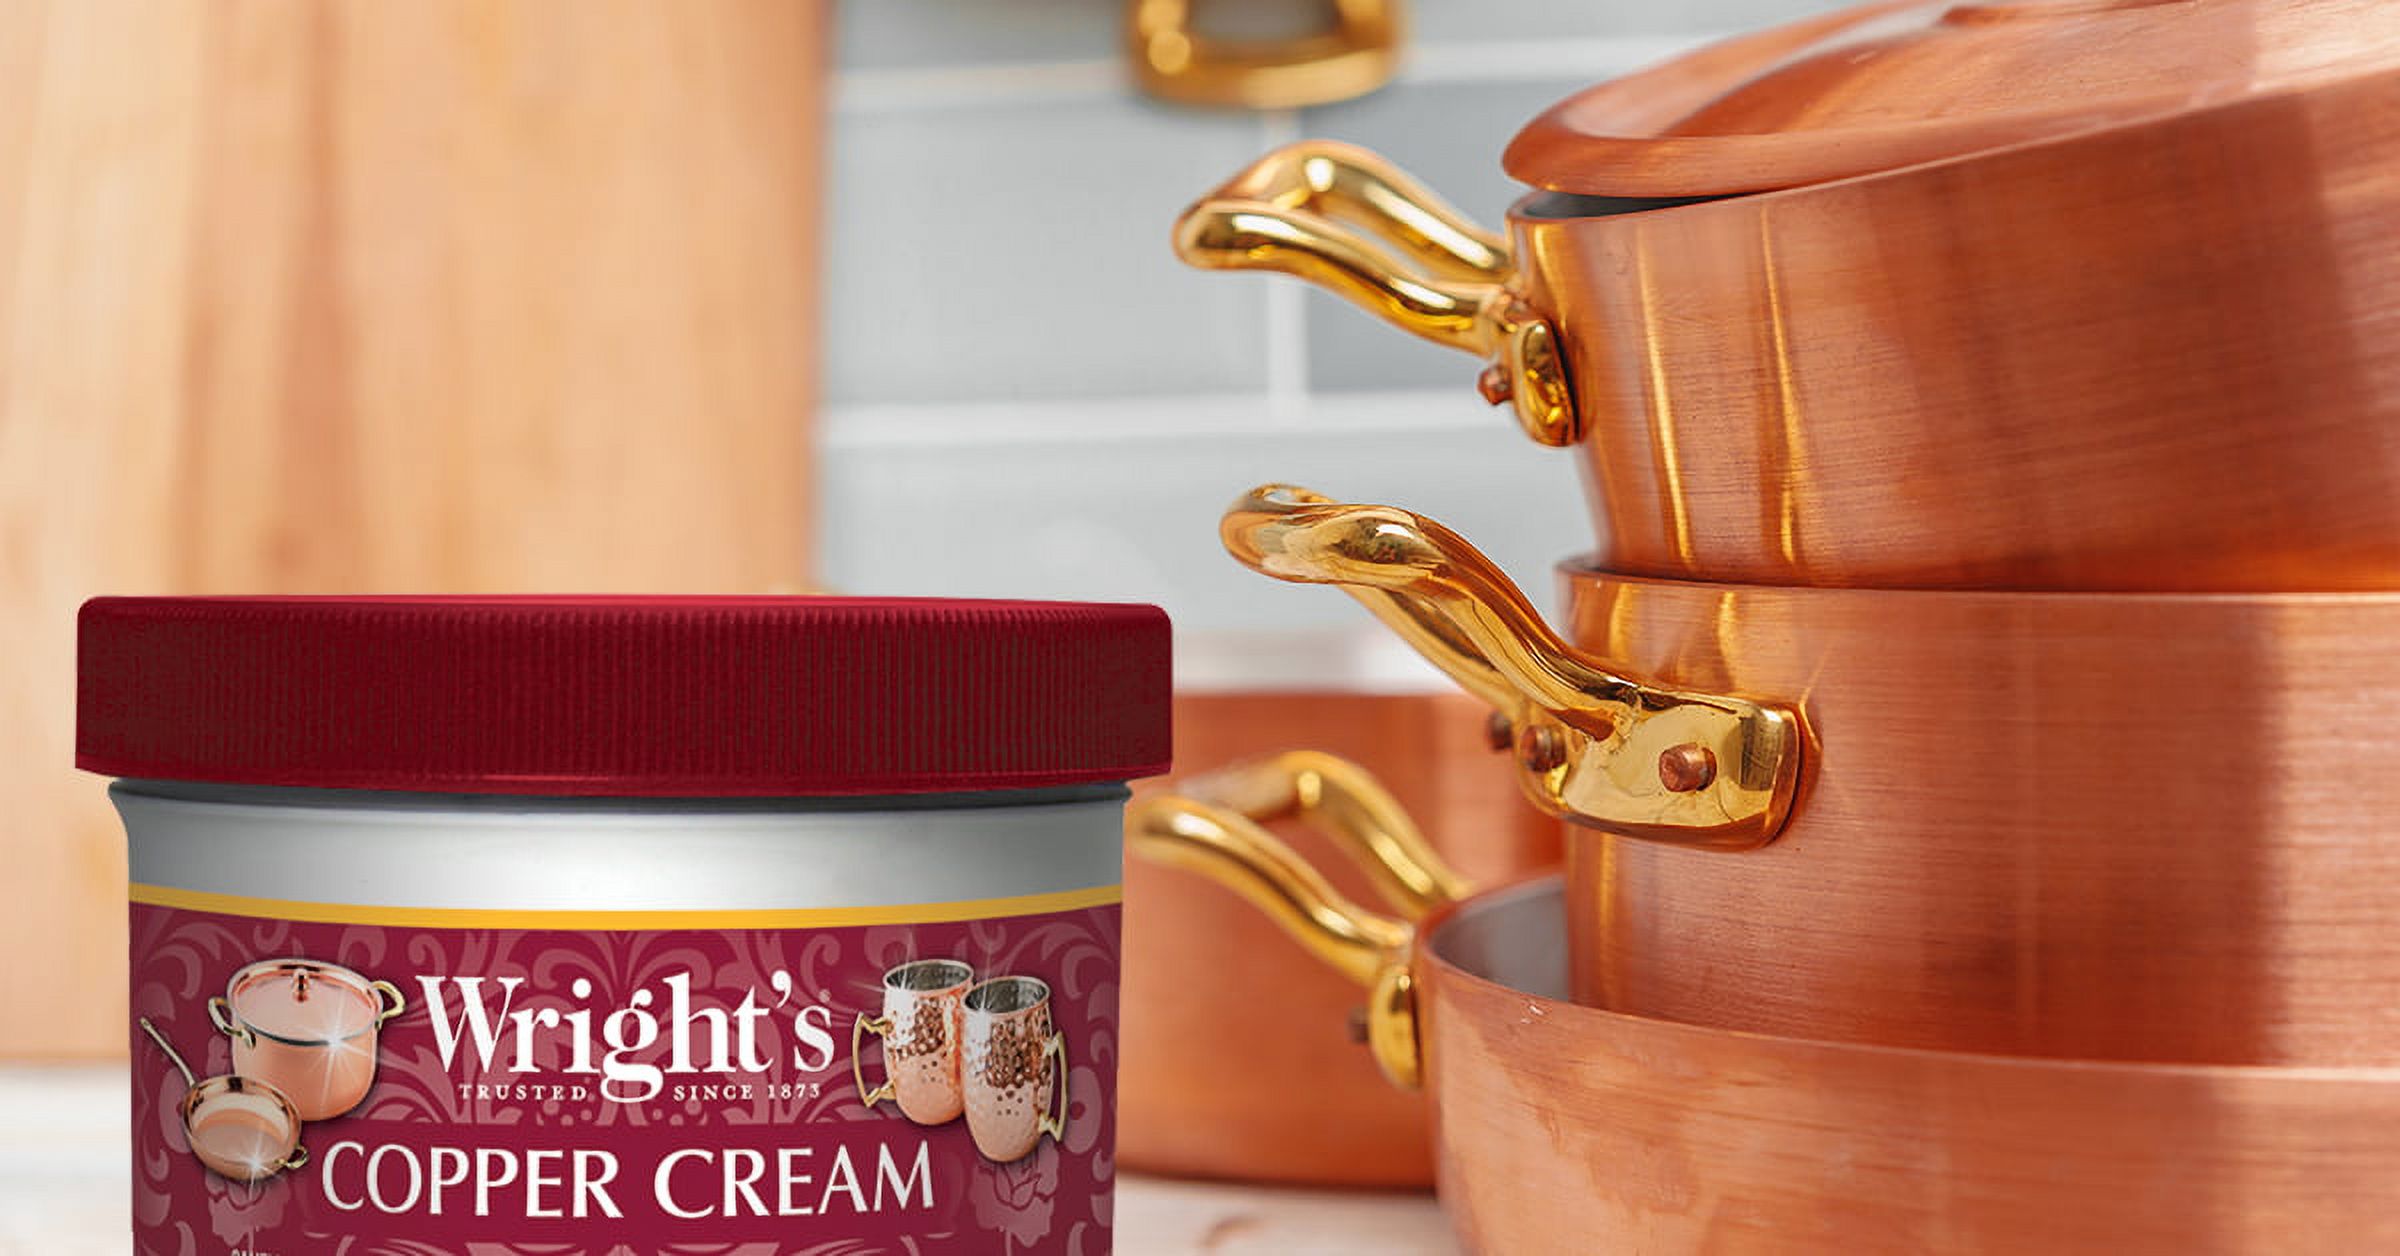 Wright's Copper and Brass Polish and Cleaner Cream- 8 Ounce - 2 Pack